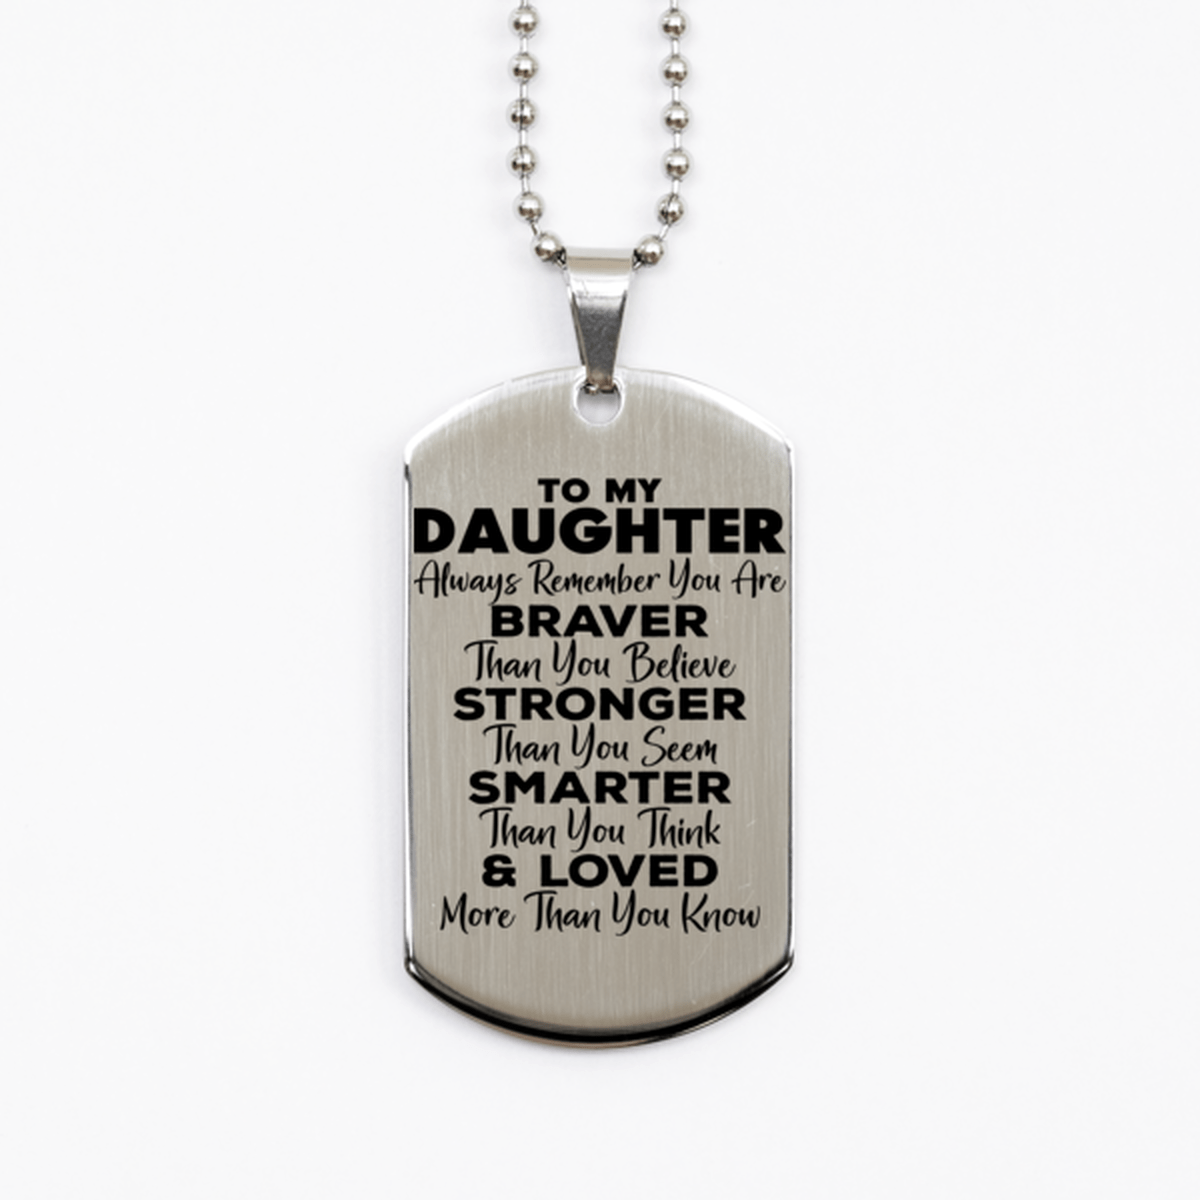 Motivational Daughter Silver Dog Tag Necklace, Daughter Always Remember You Are Braver Than You Believe, Best Birthday Gifts for Daughter